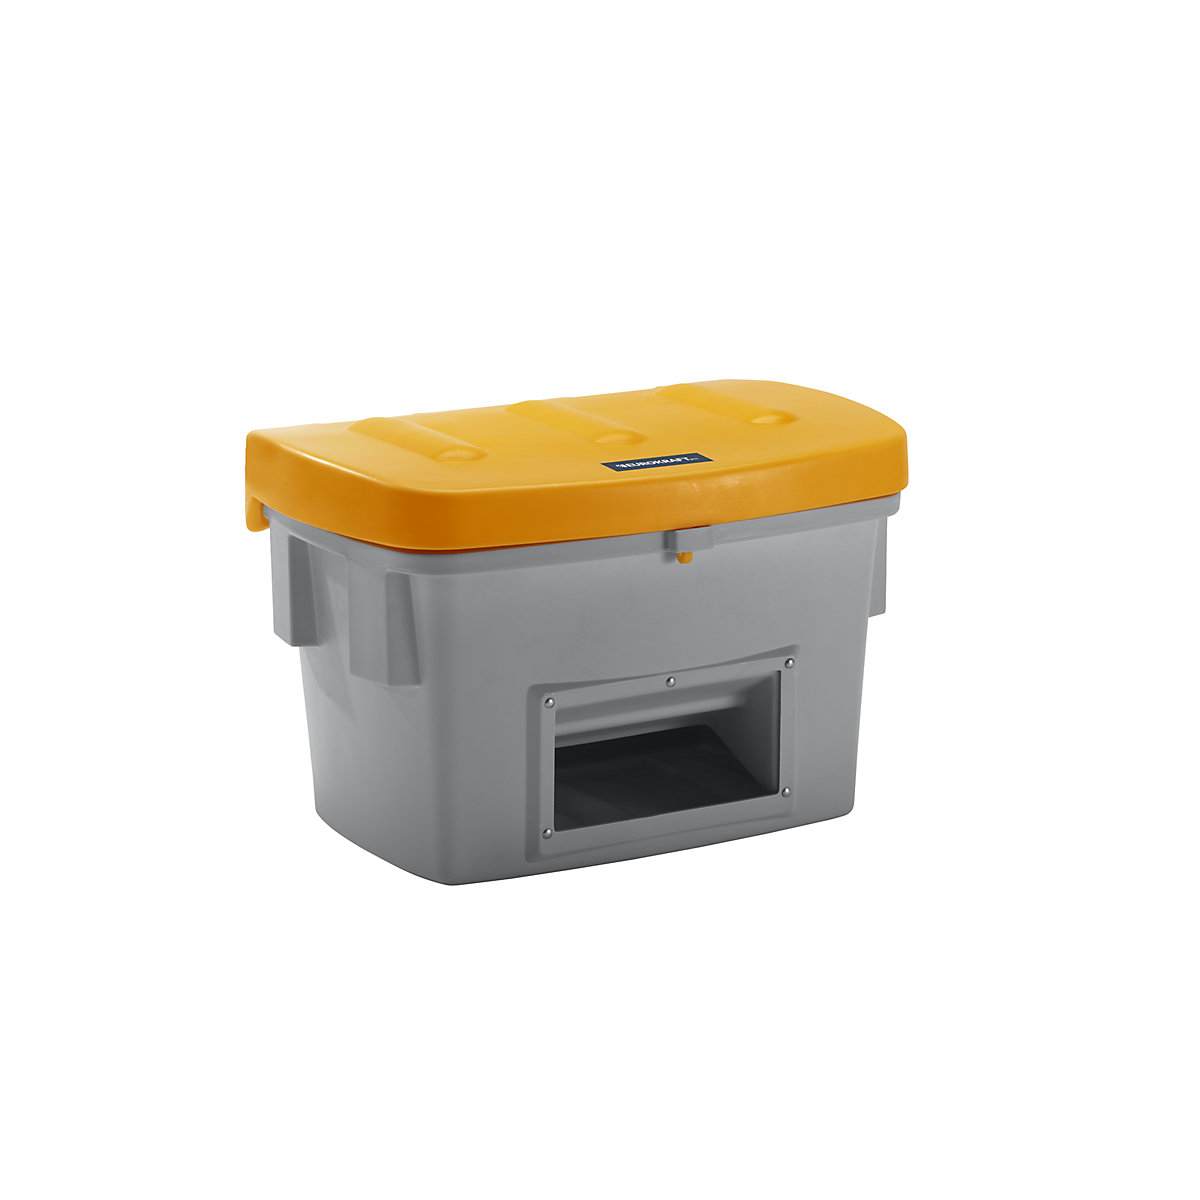 Universal / grit container – eurokraft pro, with dispenser opening, 200 l, orange lid-9